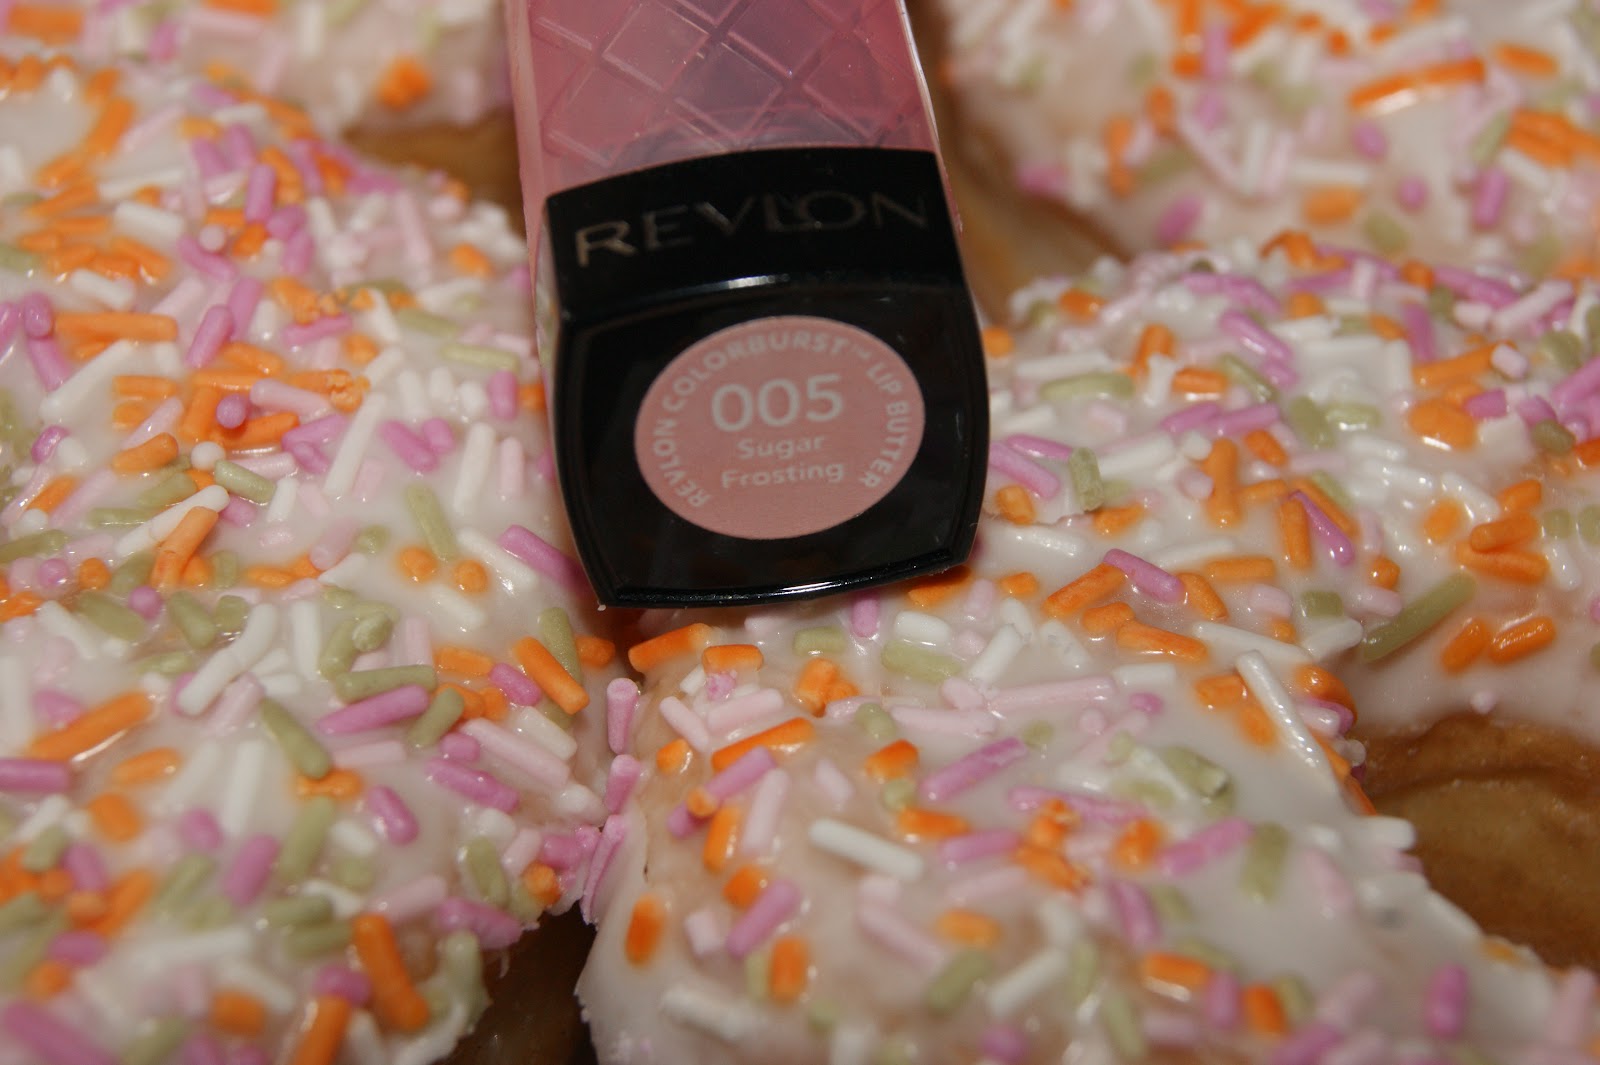 Revlon Lip Butter in Sugar Frosting picture